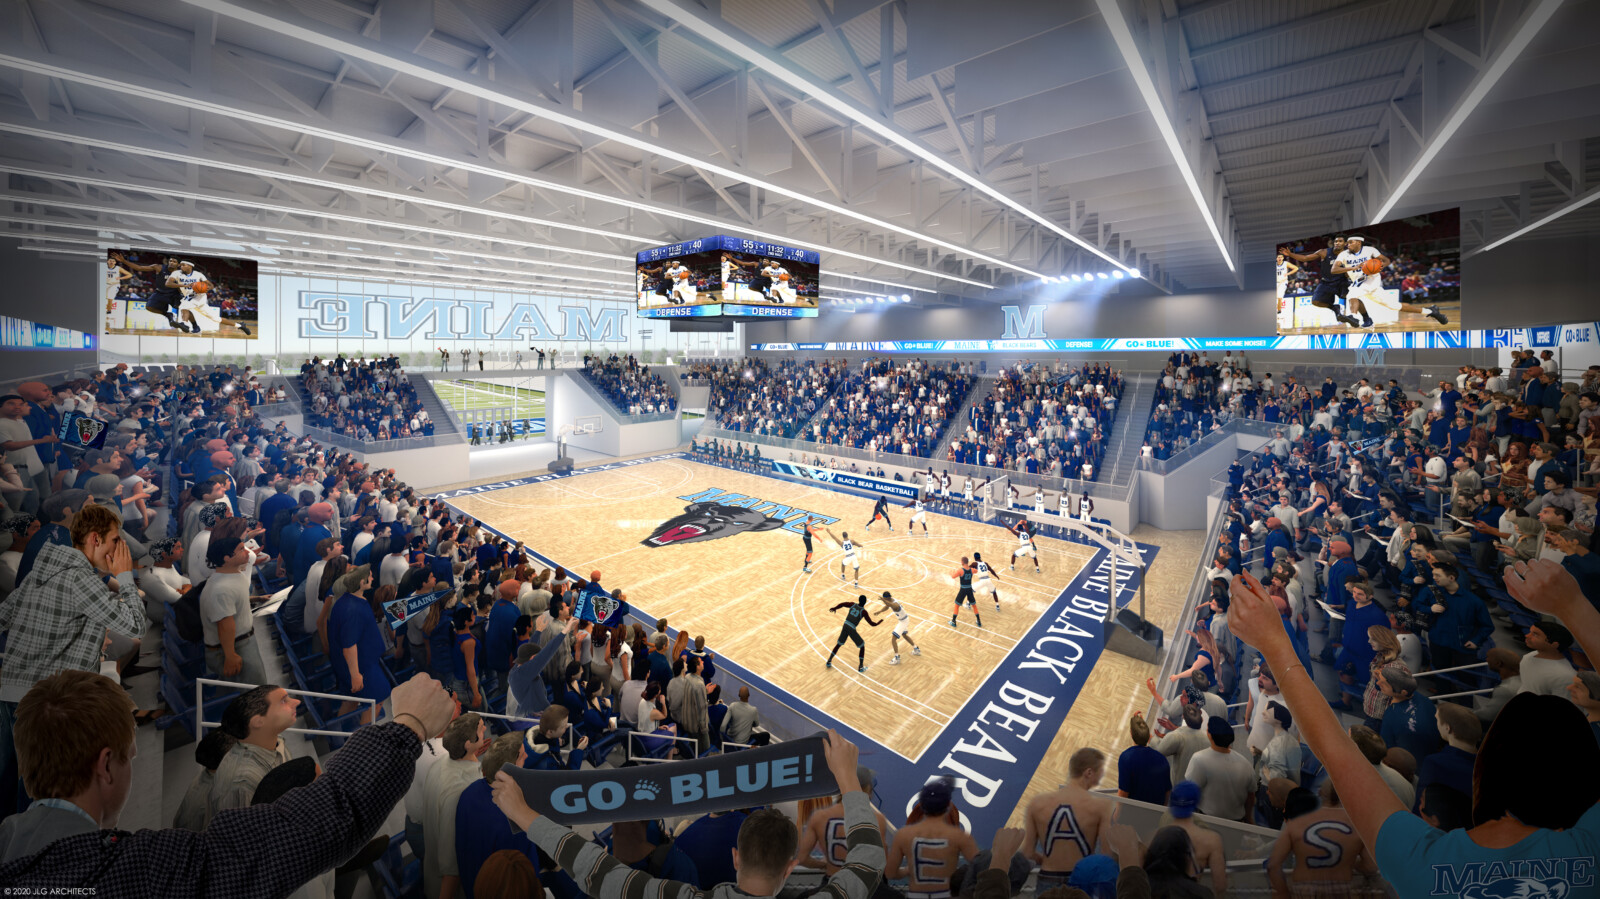 UMaine Athletics Introduces No Re-Entry Policy at Alfond Arena - University  of Maine Athletics